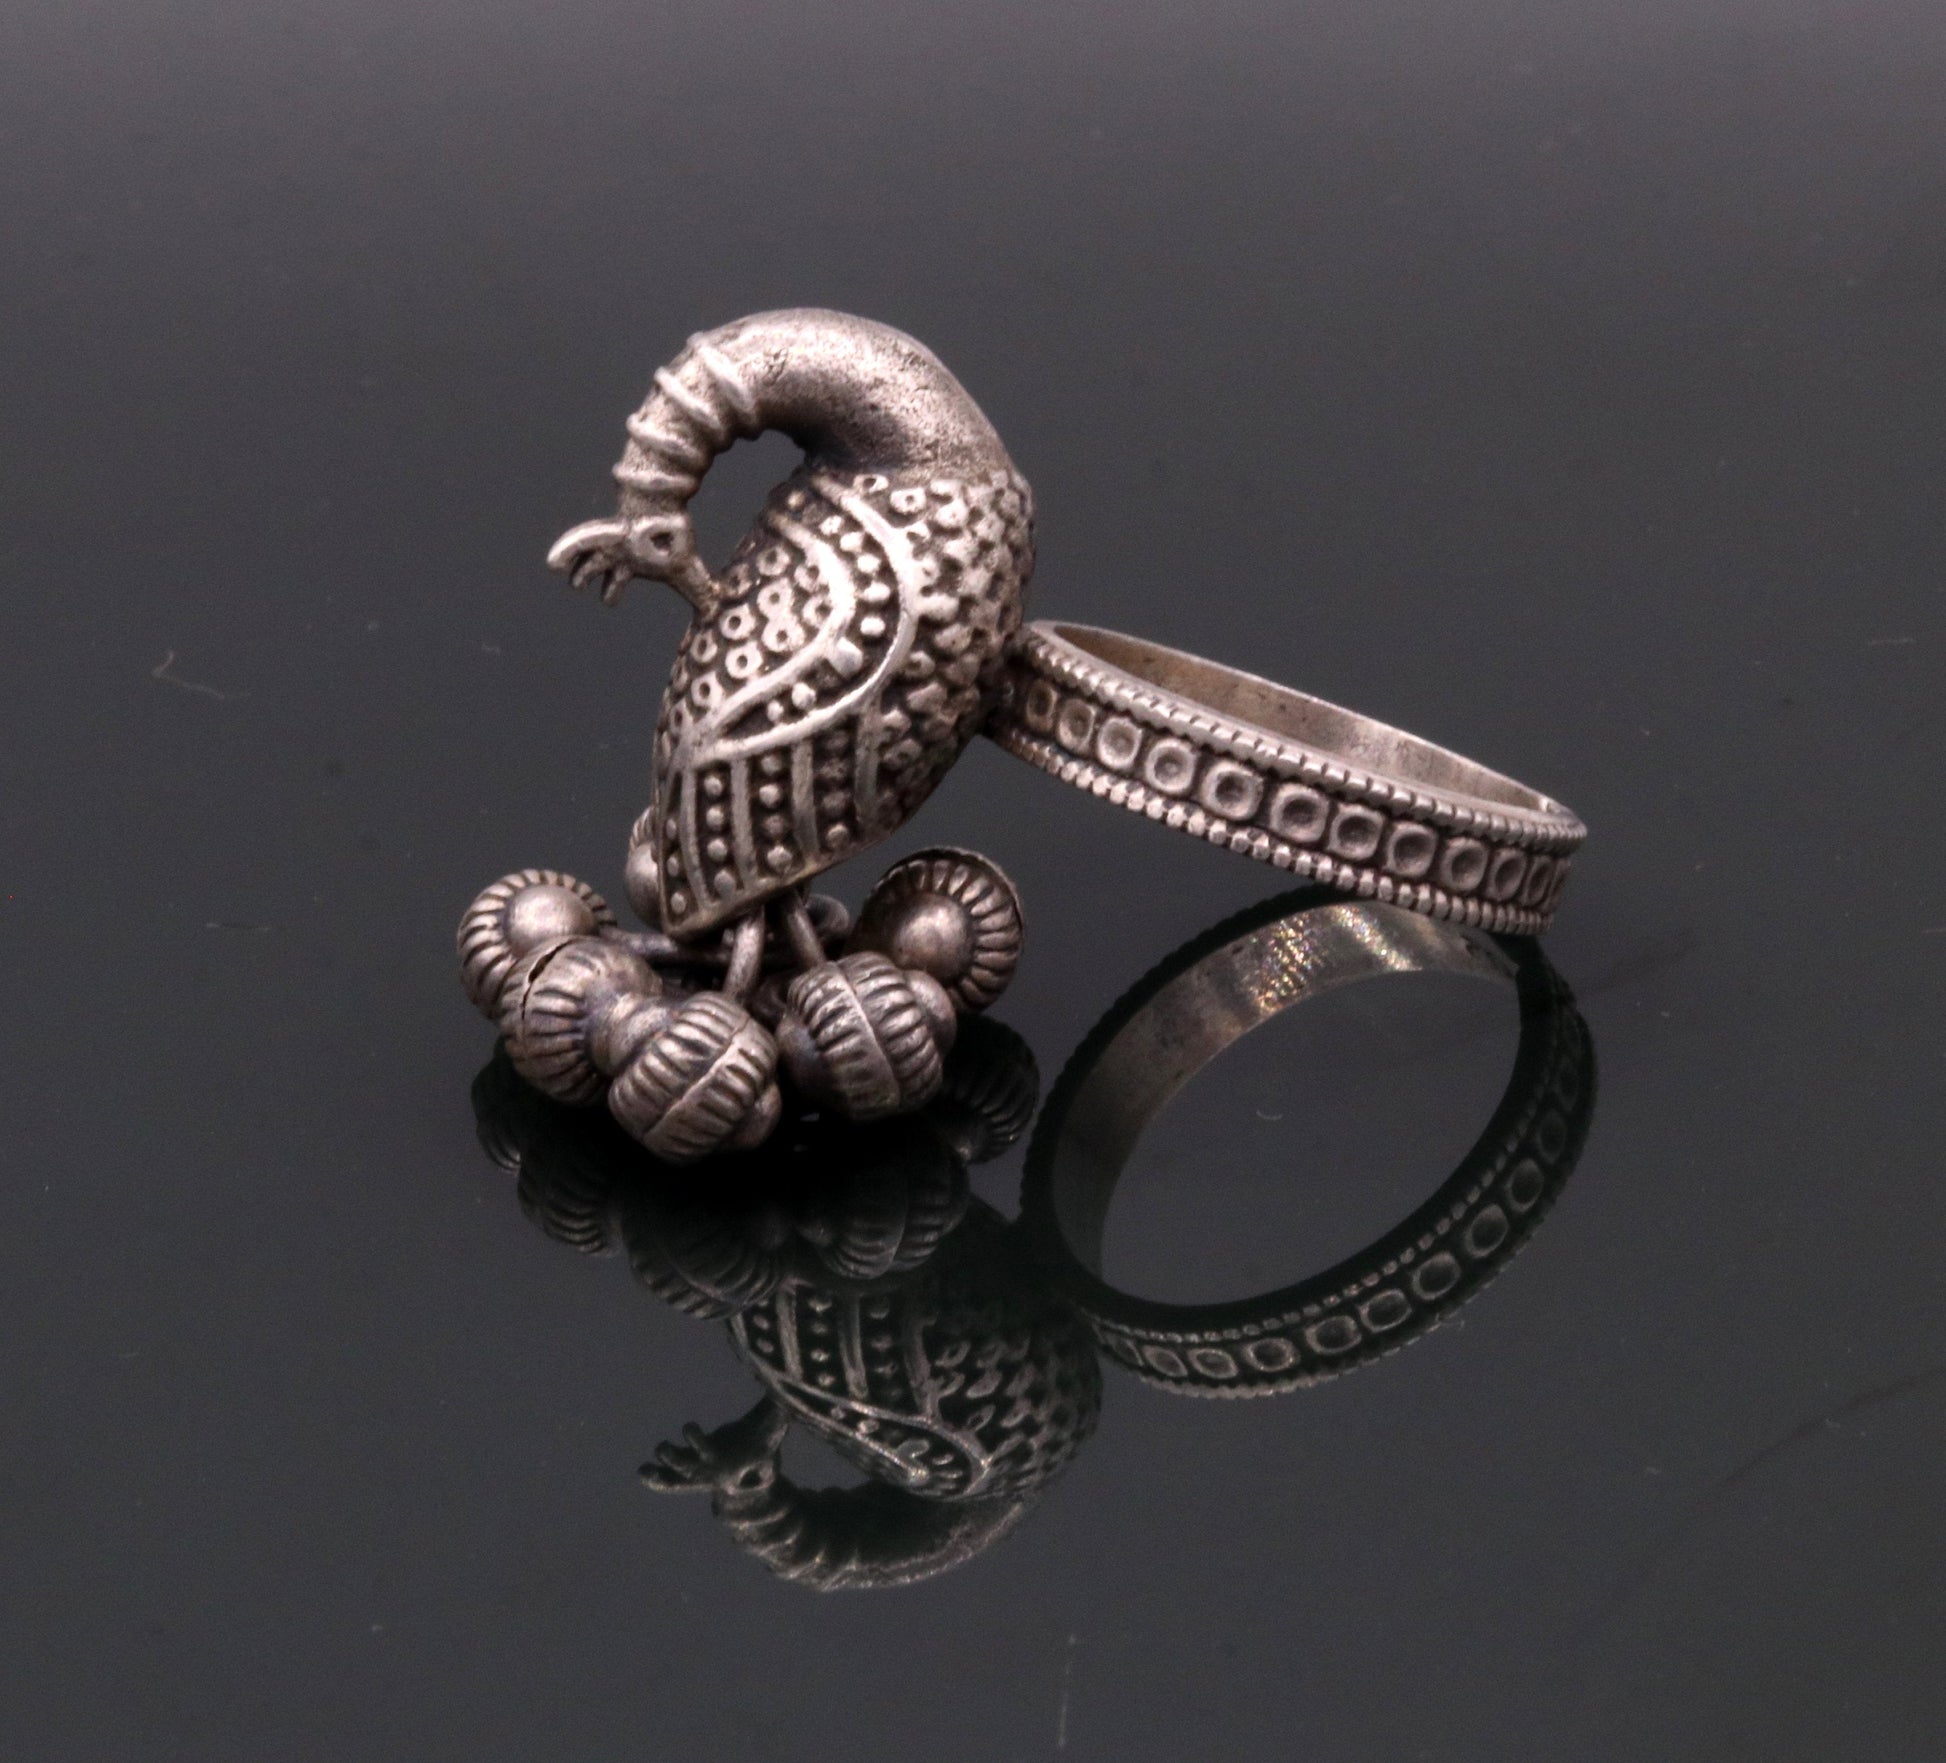 925 sterling silver handmade fabulous peacock design ring with amazing noisy jingle bells excellent customized jewelry for belly dance sr200 - TRIBAL ORNAMENTS